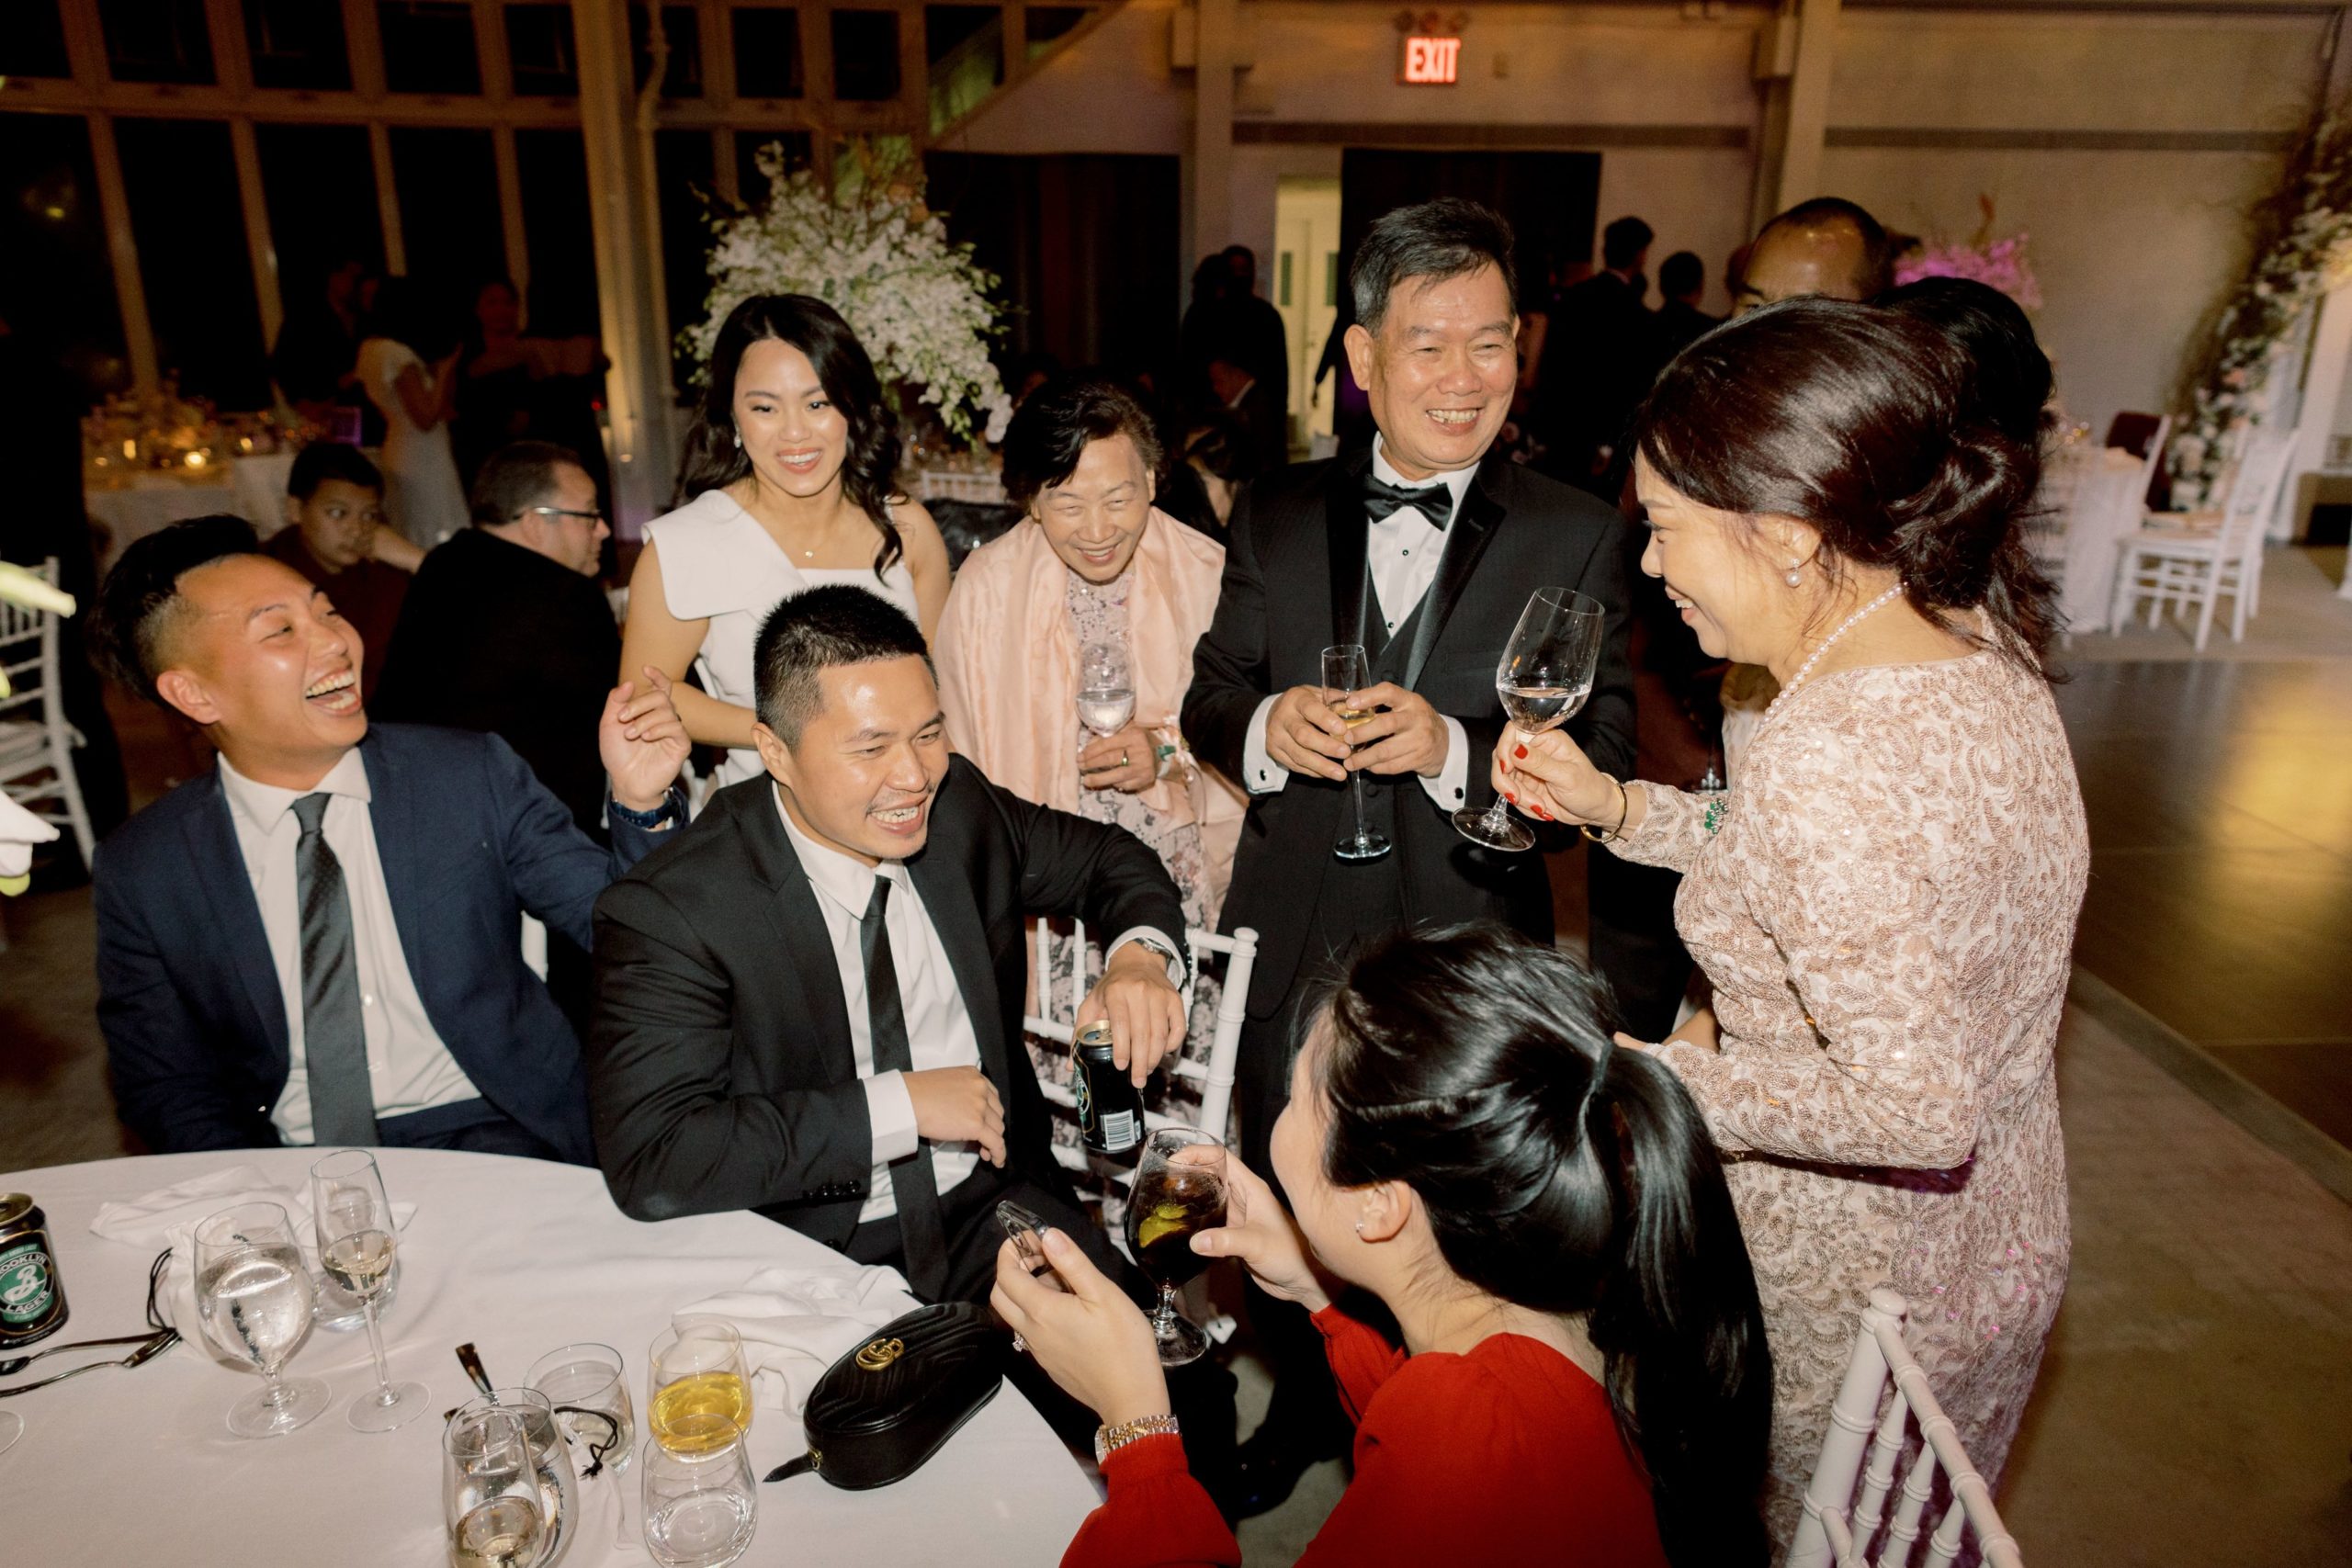 The bride and a group of guests are having a fun time at the reception. Image by Jenny Fu Studio